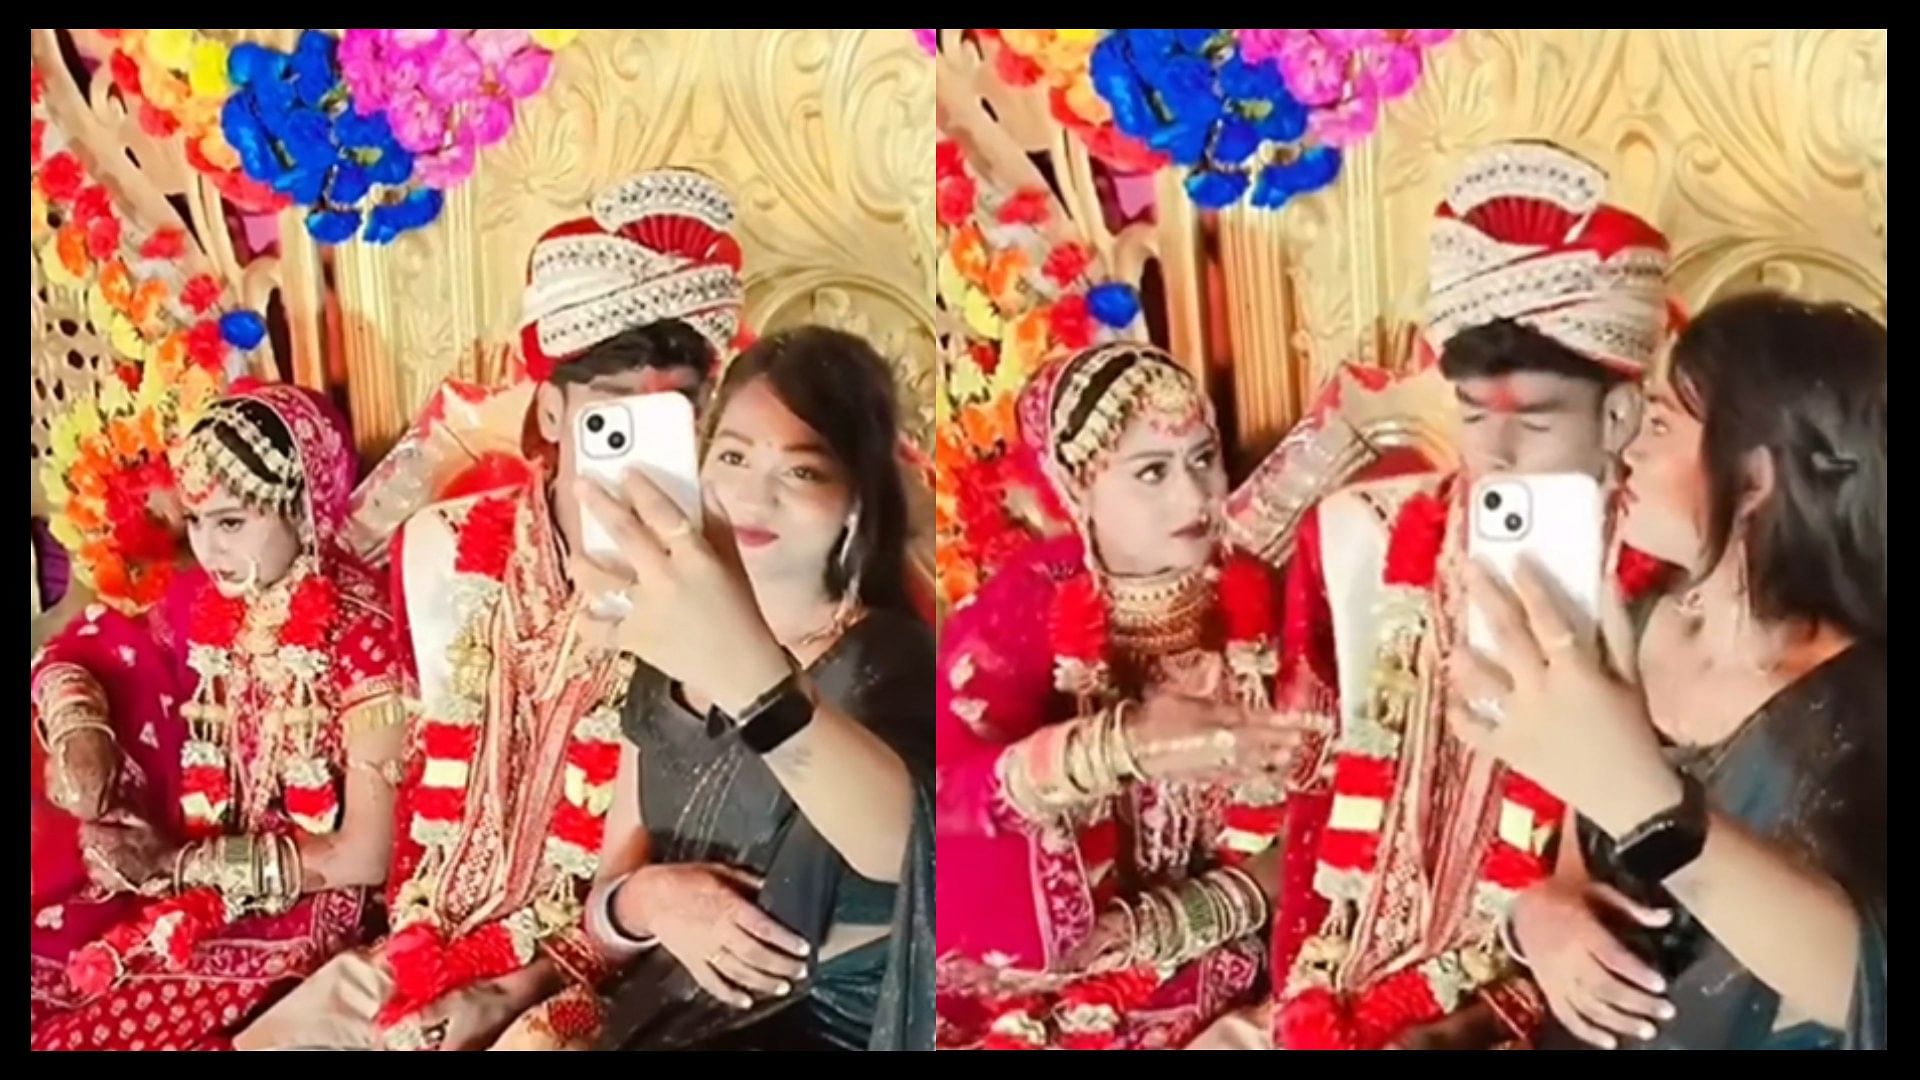 Groom selfie with other girl angry bride slapped on stage video viral on social media